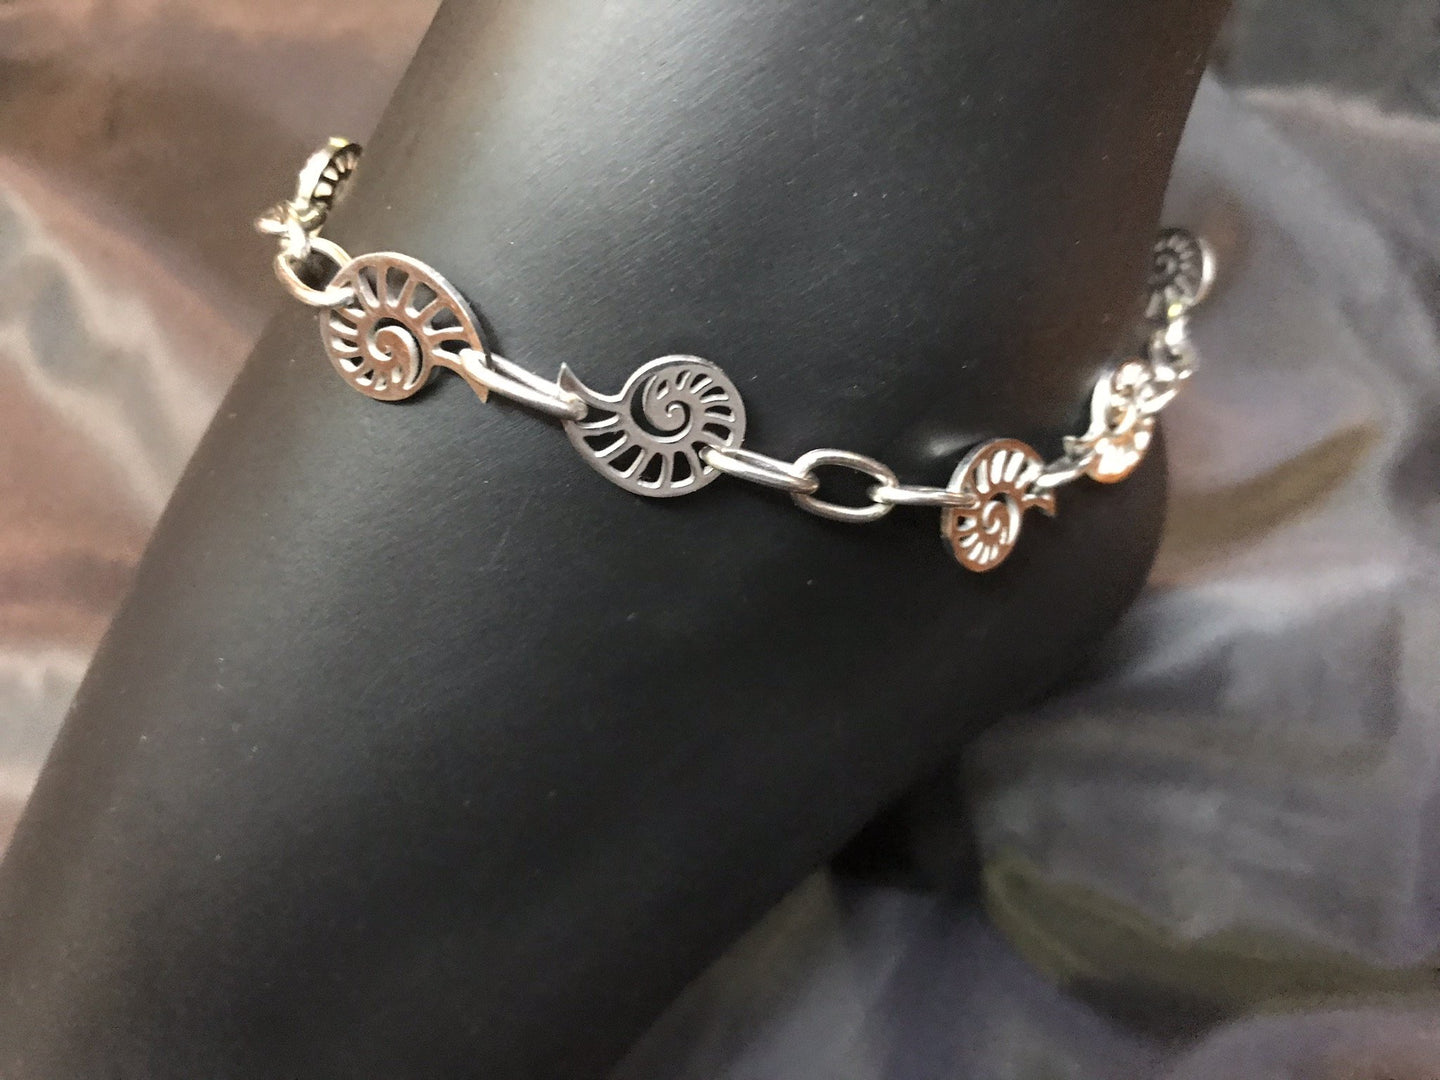 Delicate stainless steel nautilus charms form links in the chain in this rust-resistant anklet that can stay with you throughout all your adventures.